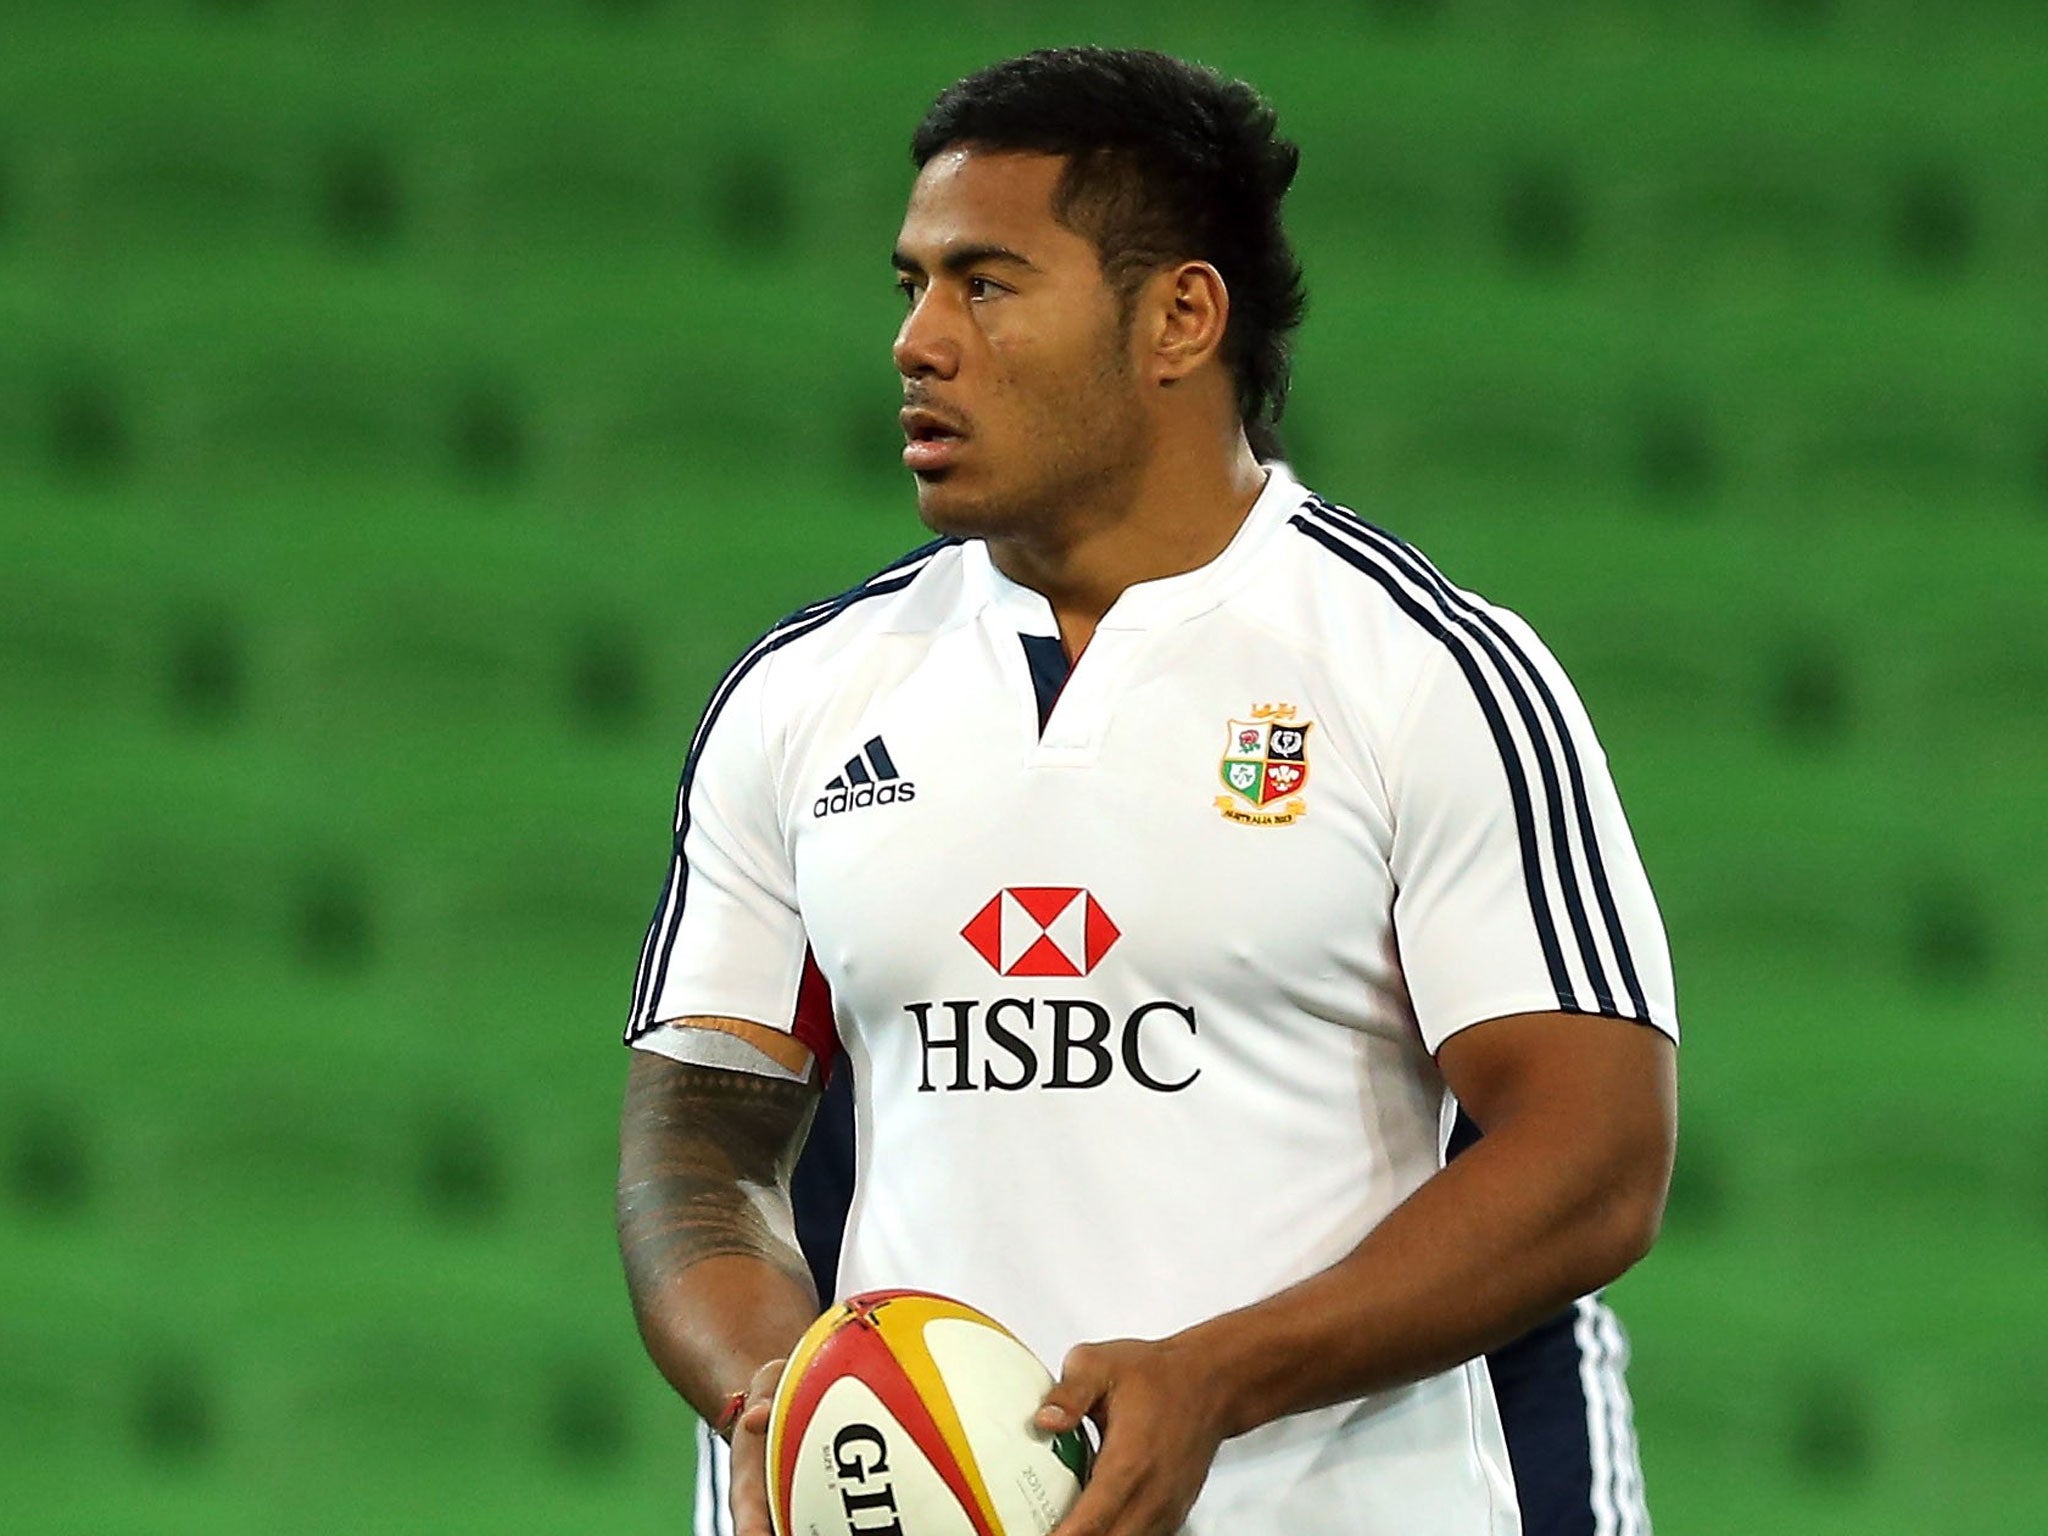 Manu Tuilagi trains yesterday ahead of the match in Melbourne